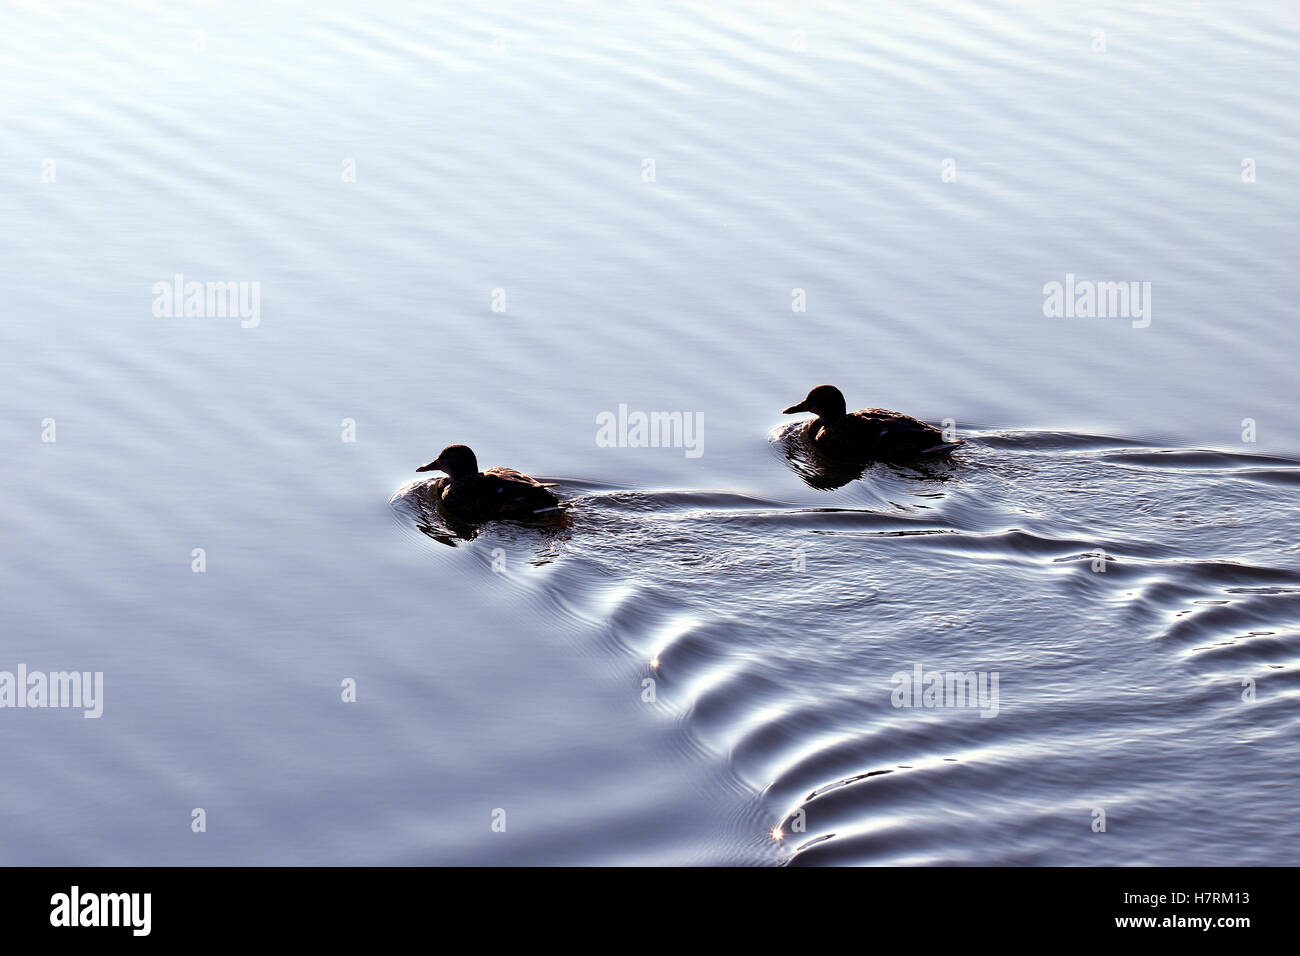 Ducks swimming in calm sea. Silhouette and following wave. Stock Photo